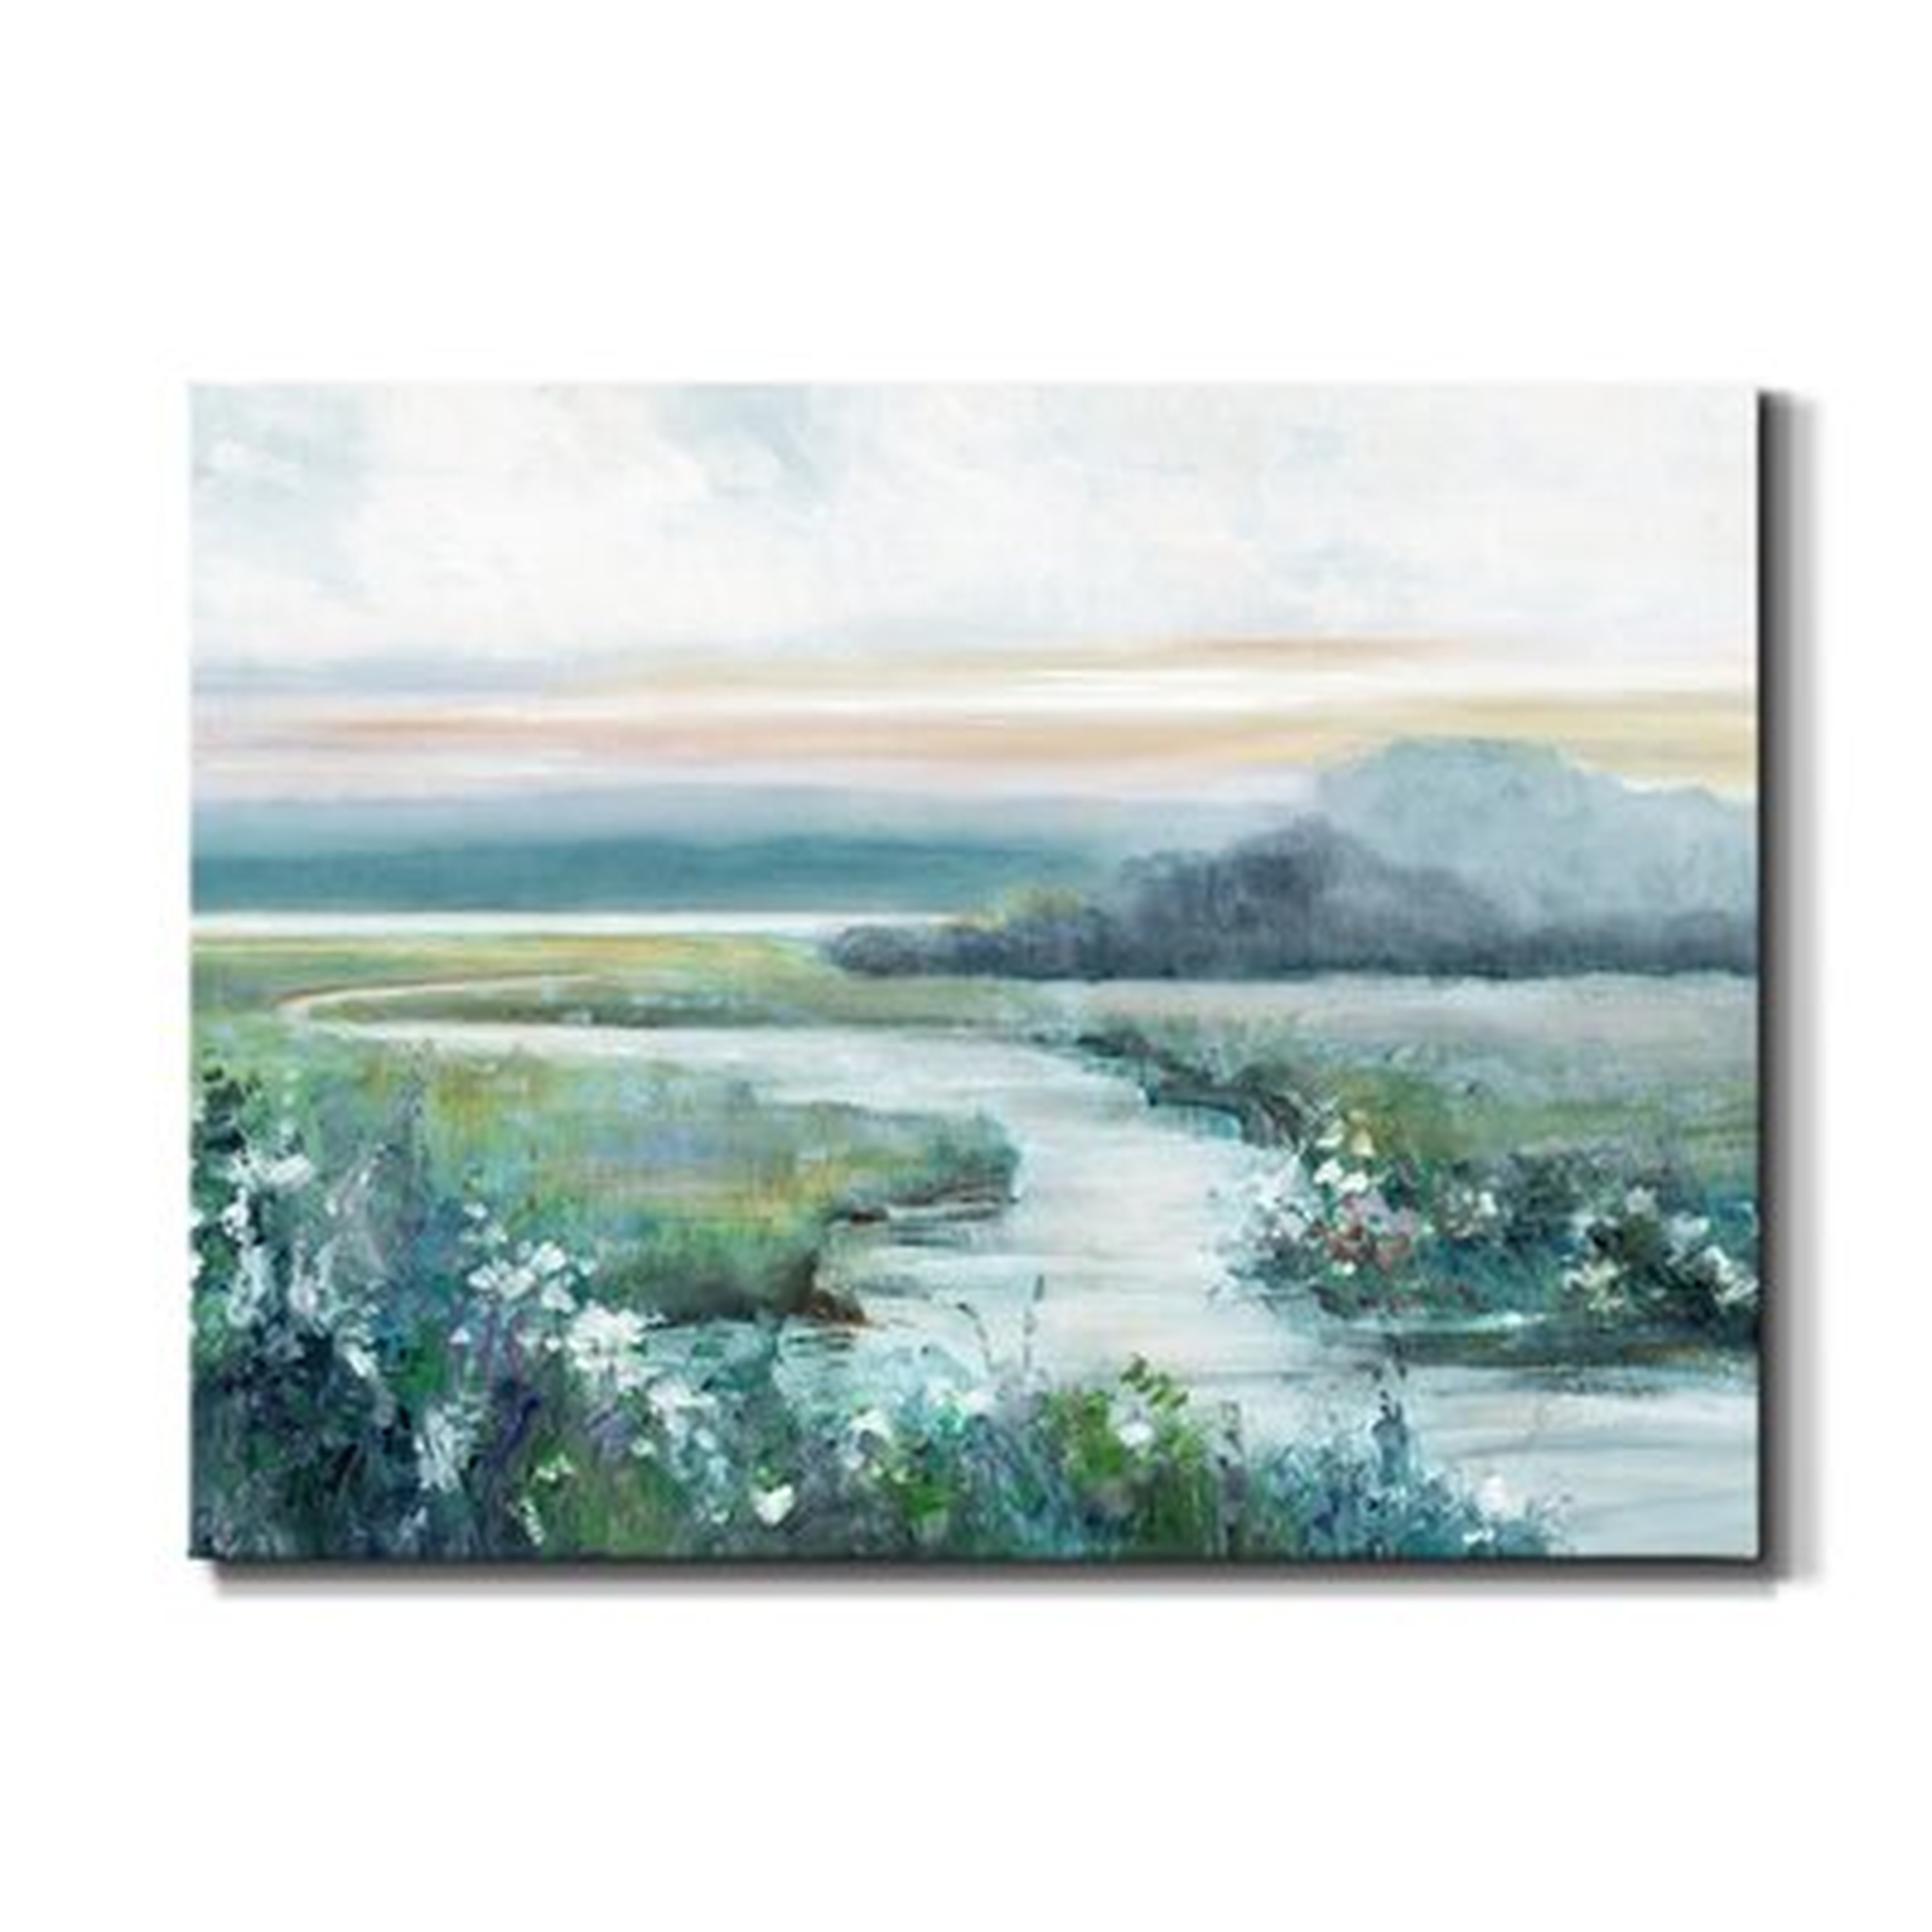 Eternity in Twilight by J Paul - Wrapped Canvas Painting Print - Wayfair